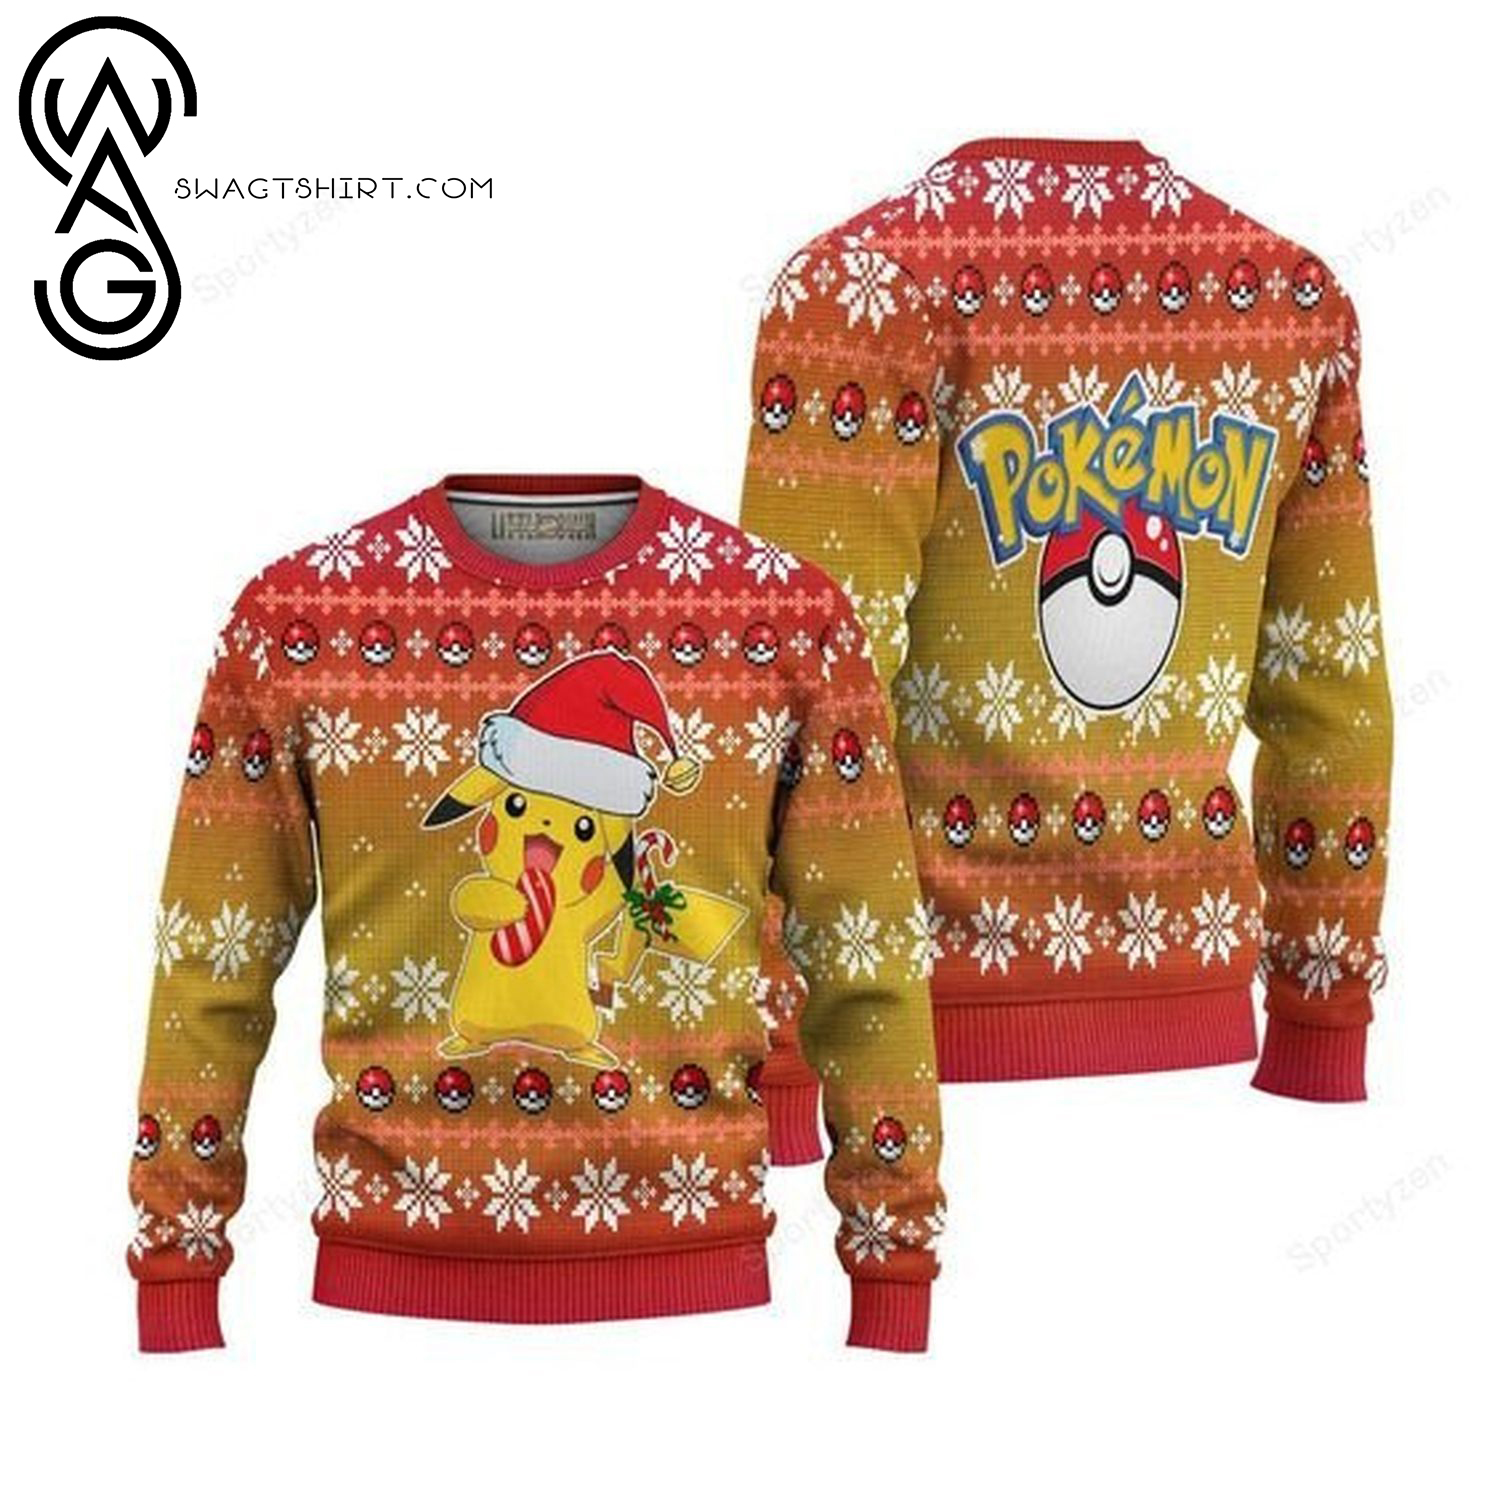 Pokemon Pikachu And Candy Full Print Ugly Christmas Sweater